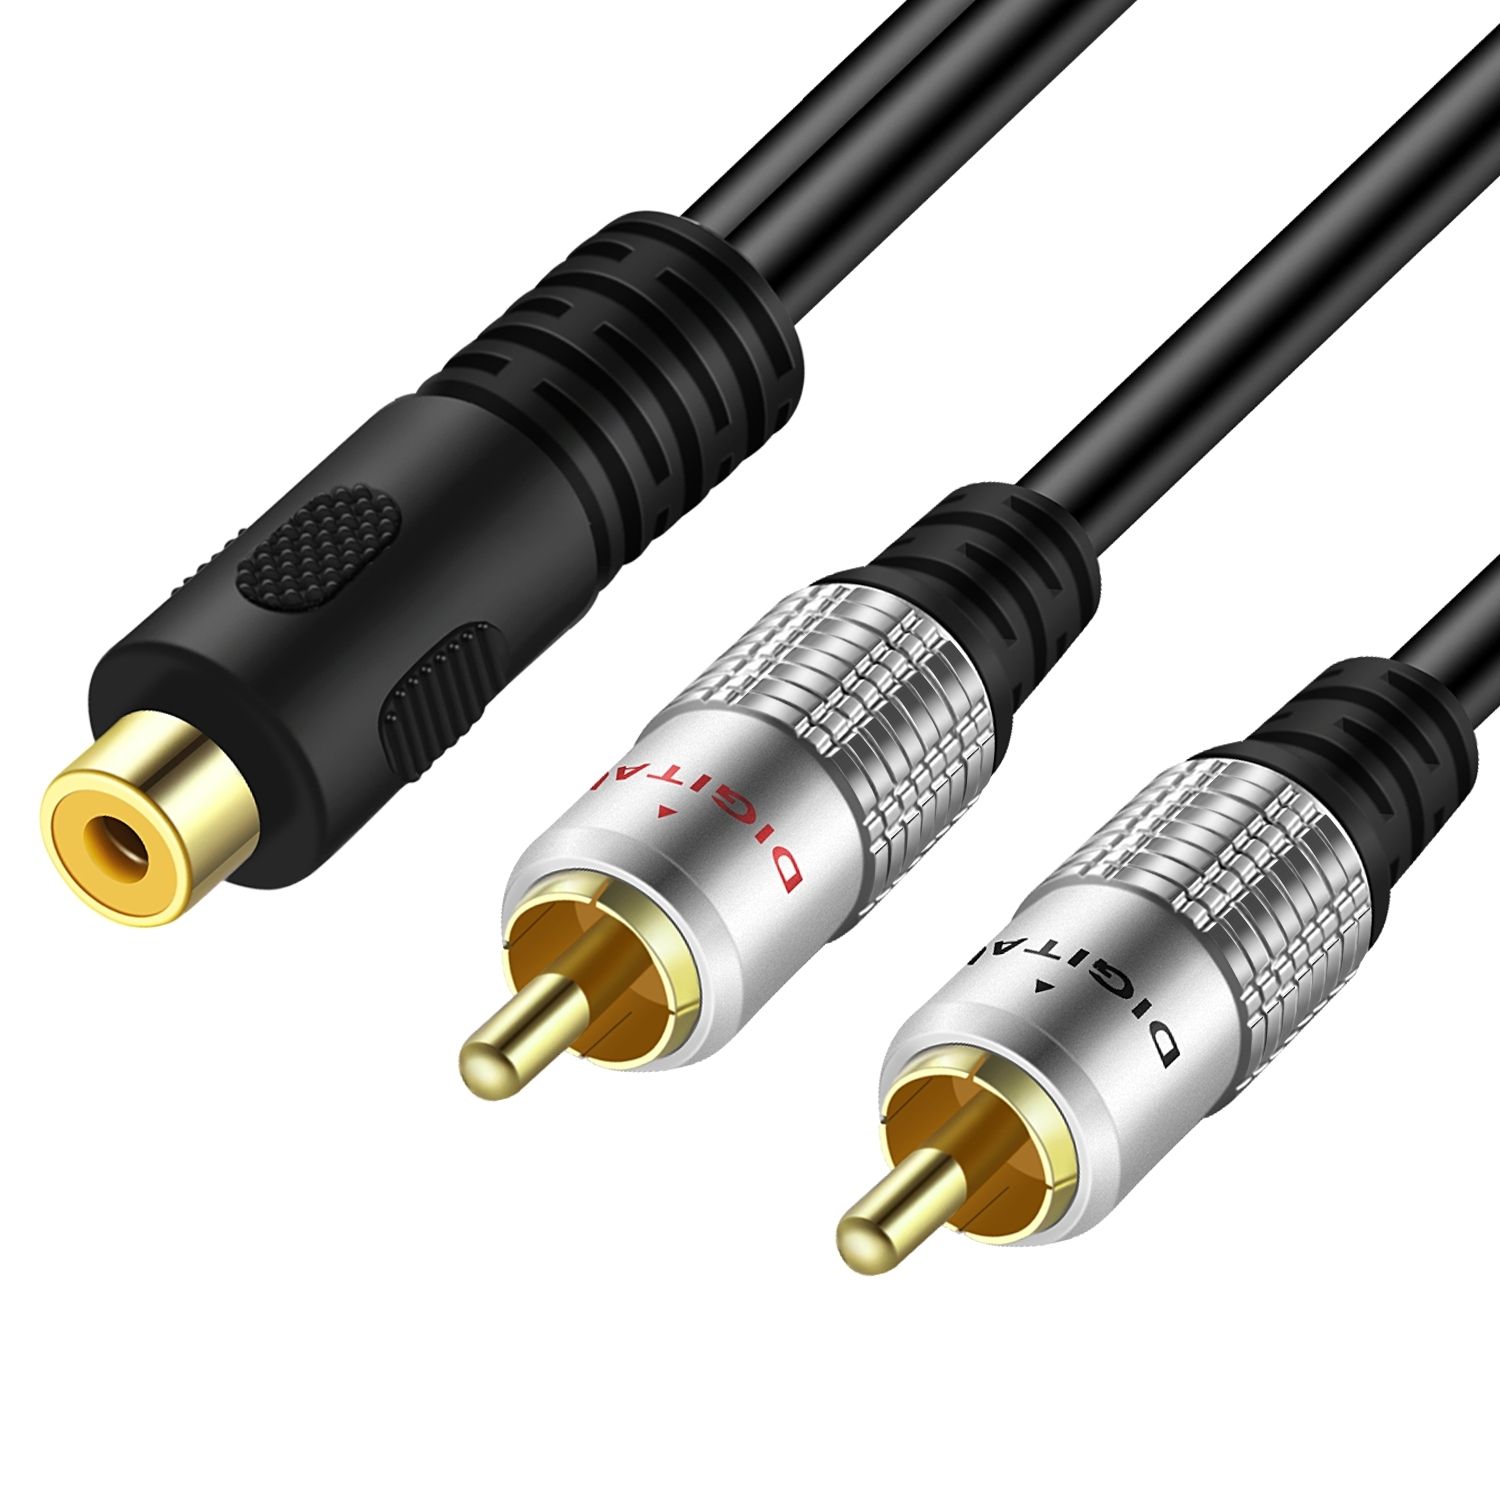 Premium RCA Y Adapter Cable Splitter (6 Inch) - RCAF to Dual RCA Y-Cable 1-Female to 2-Male Connector Wire Cord Plug Jack for Digital Audio or Subwoofer - (Stereo Female to Two RCA Mono Male) - image 1 of 7